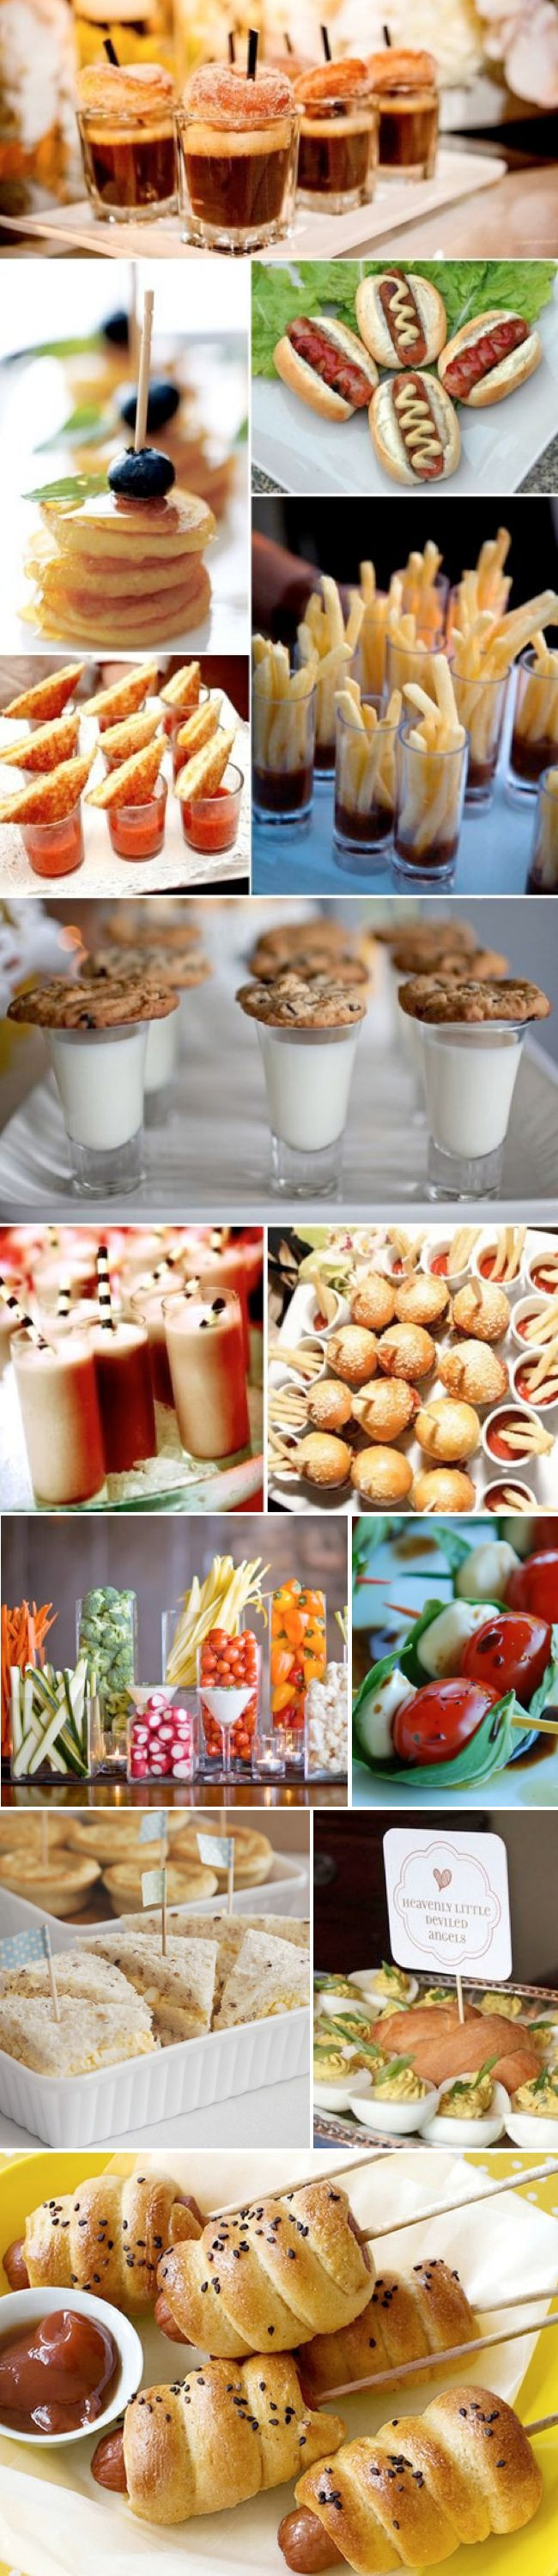 Cocktail Party Food Ideas
 finger food ideas for any party